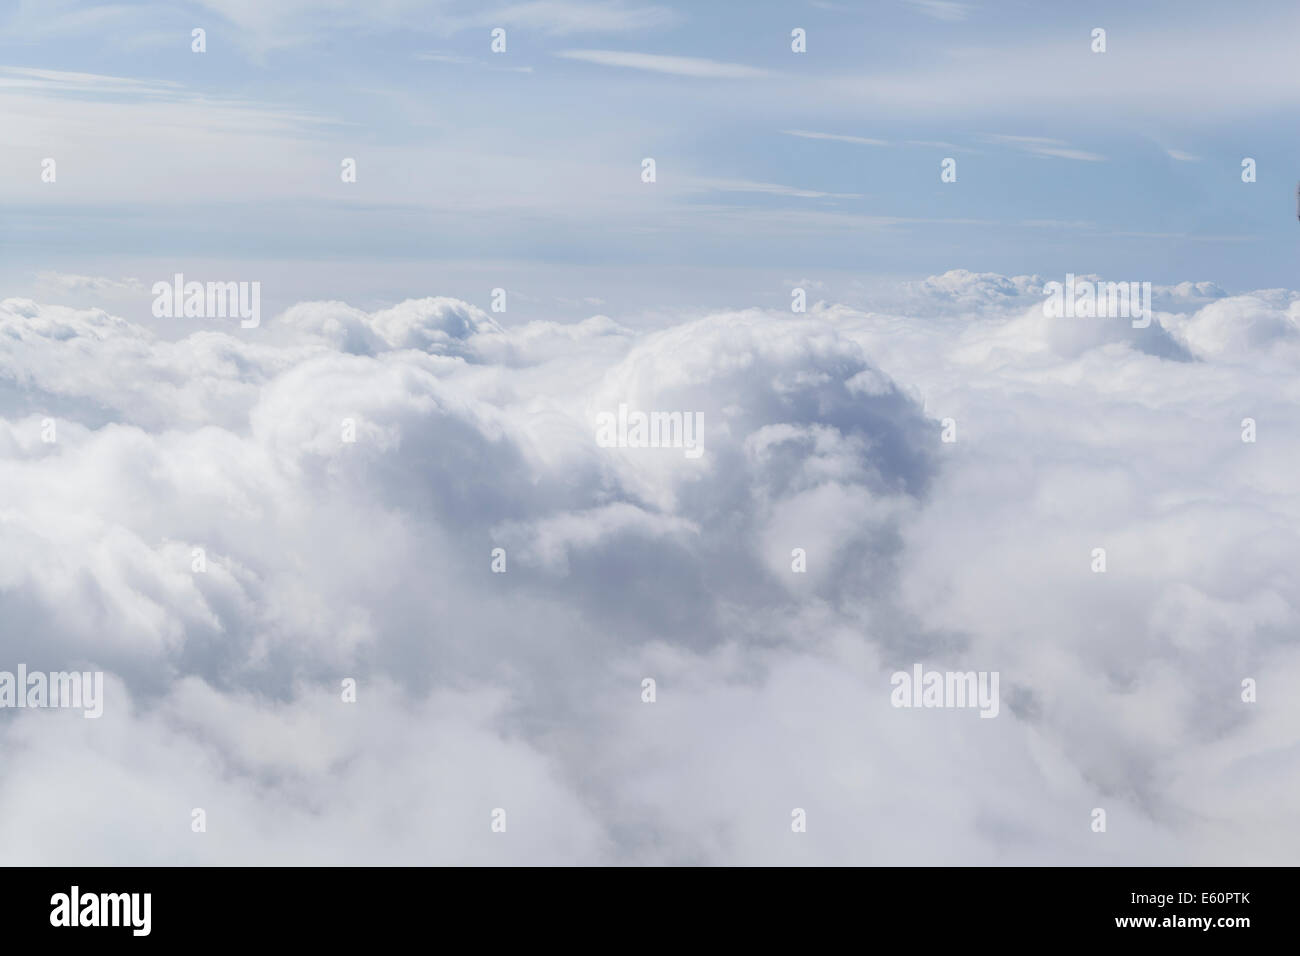 Cloud formation photographed from above Stock Photo